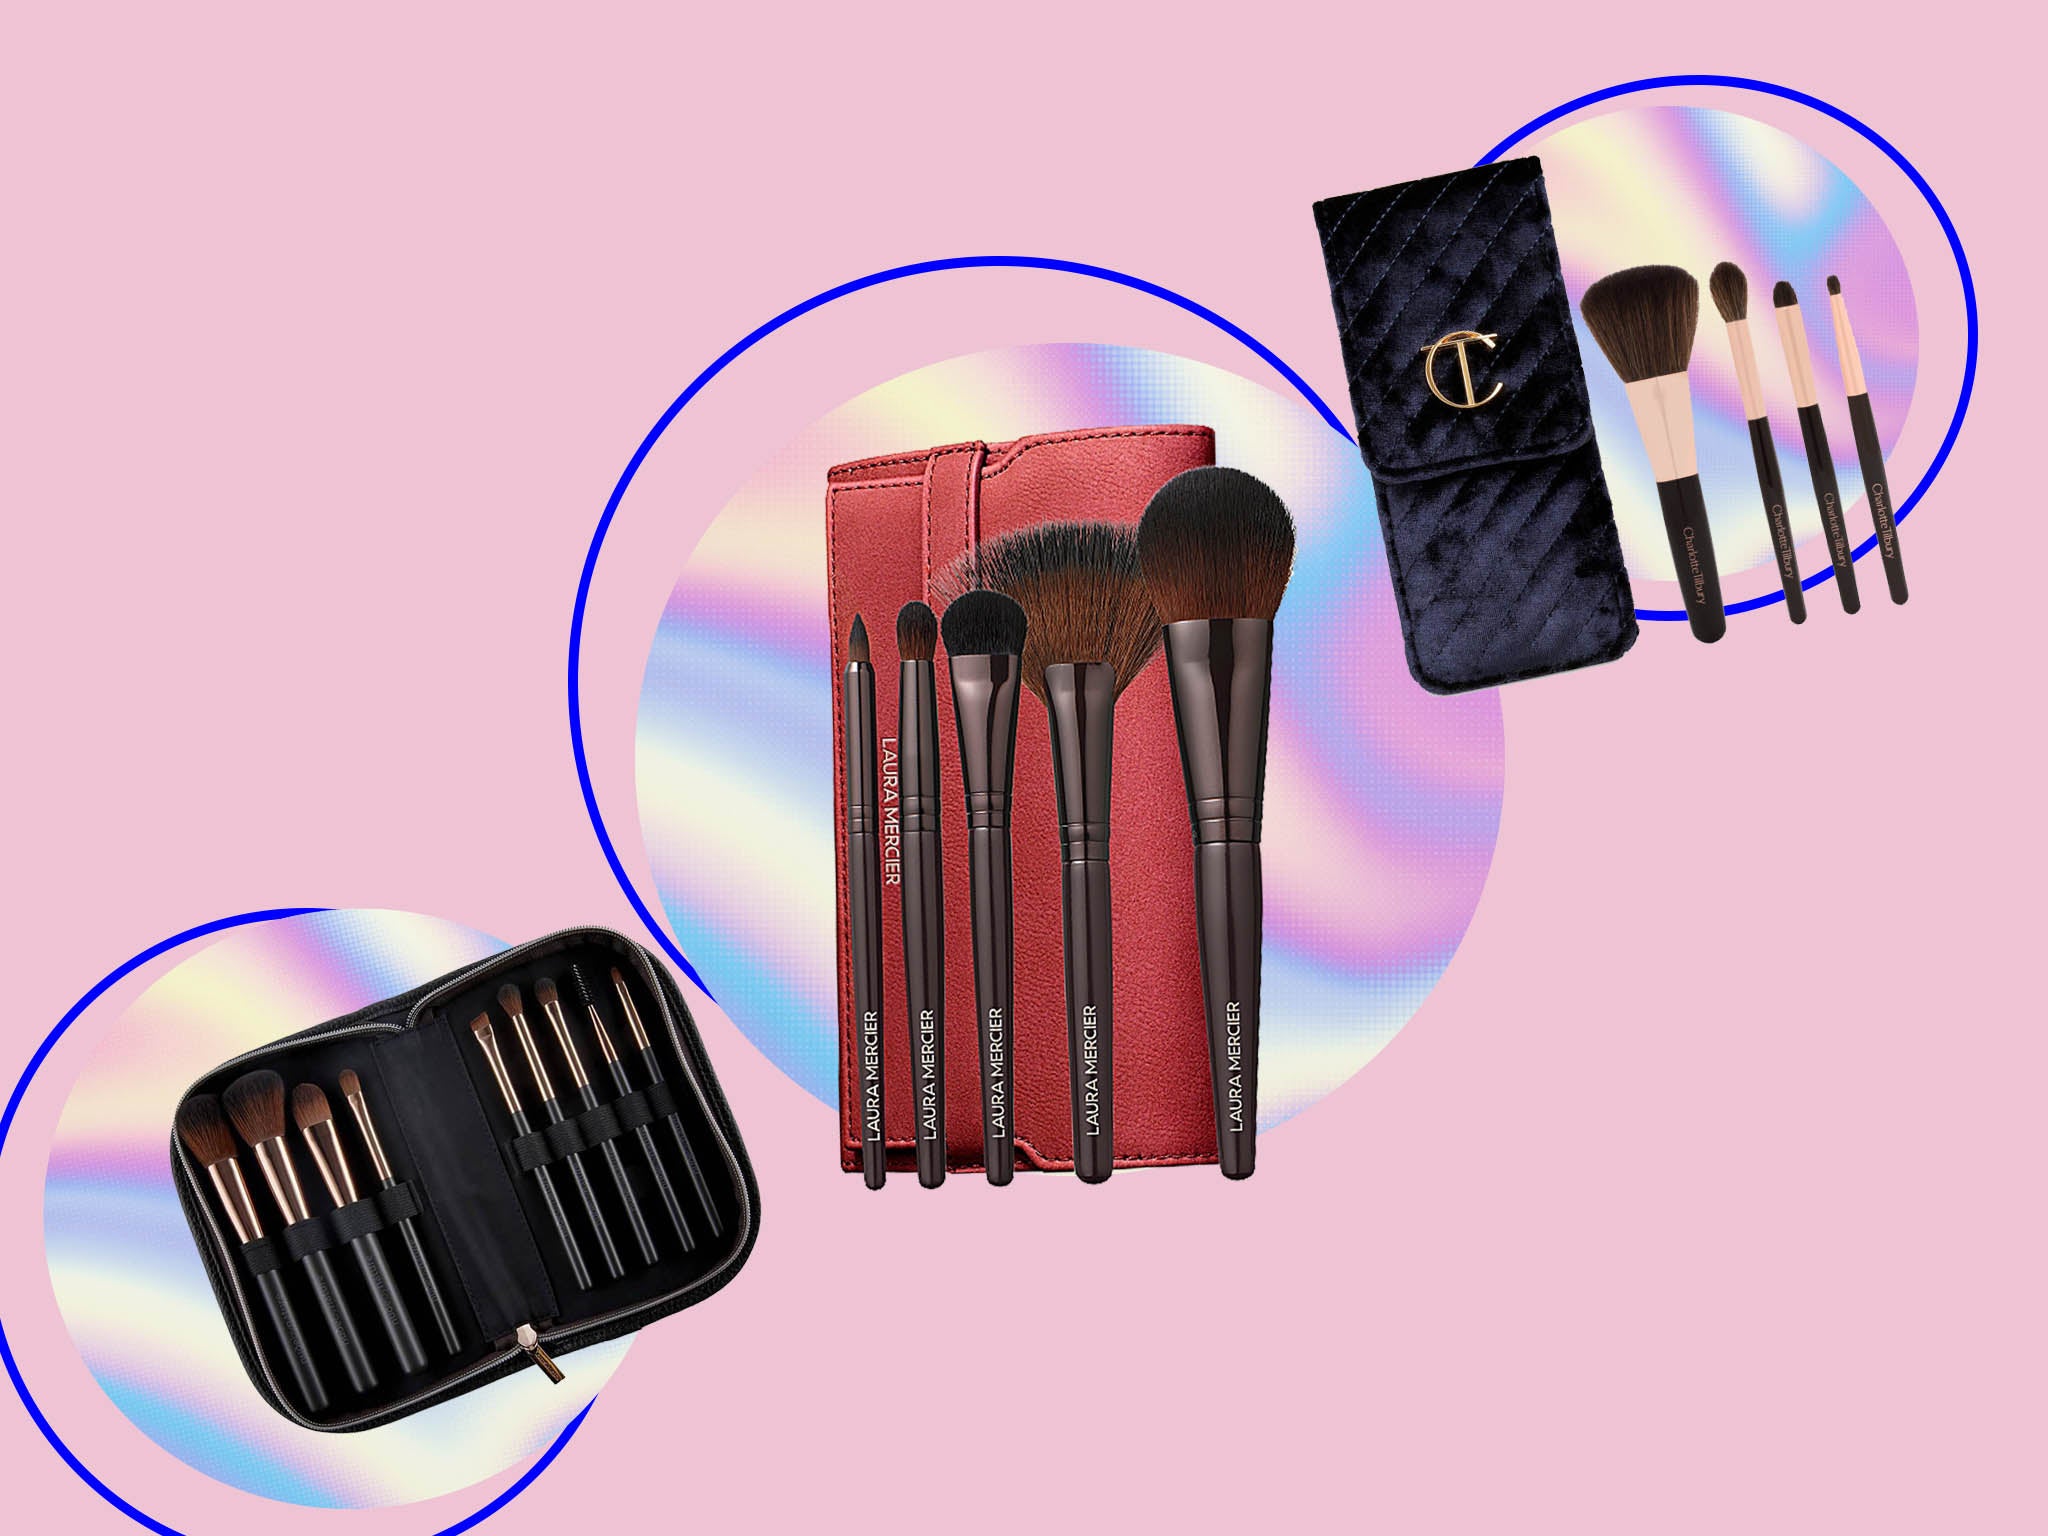 10 best make-up brush sets for flawless application every time